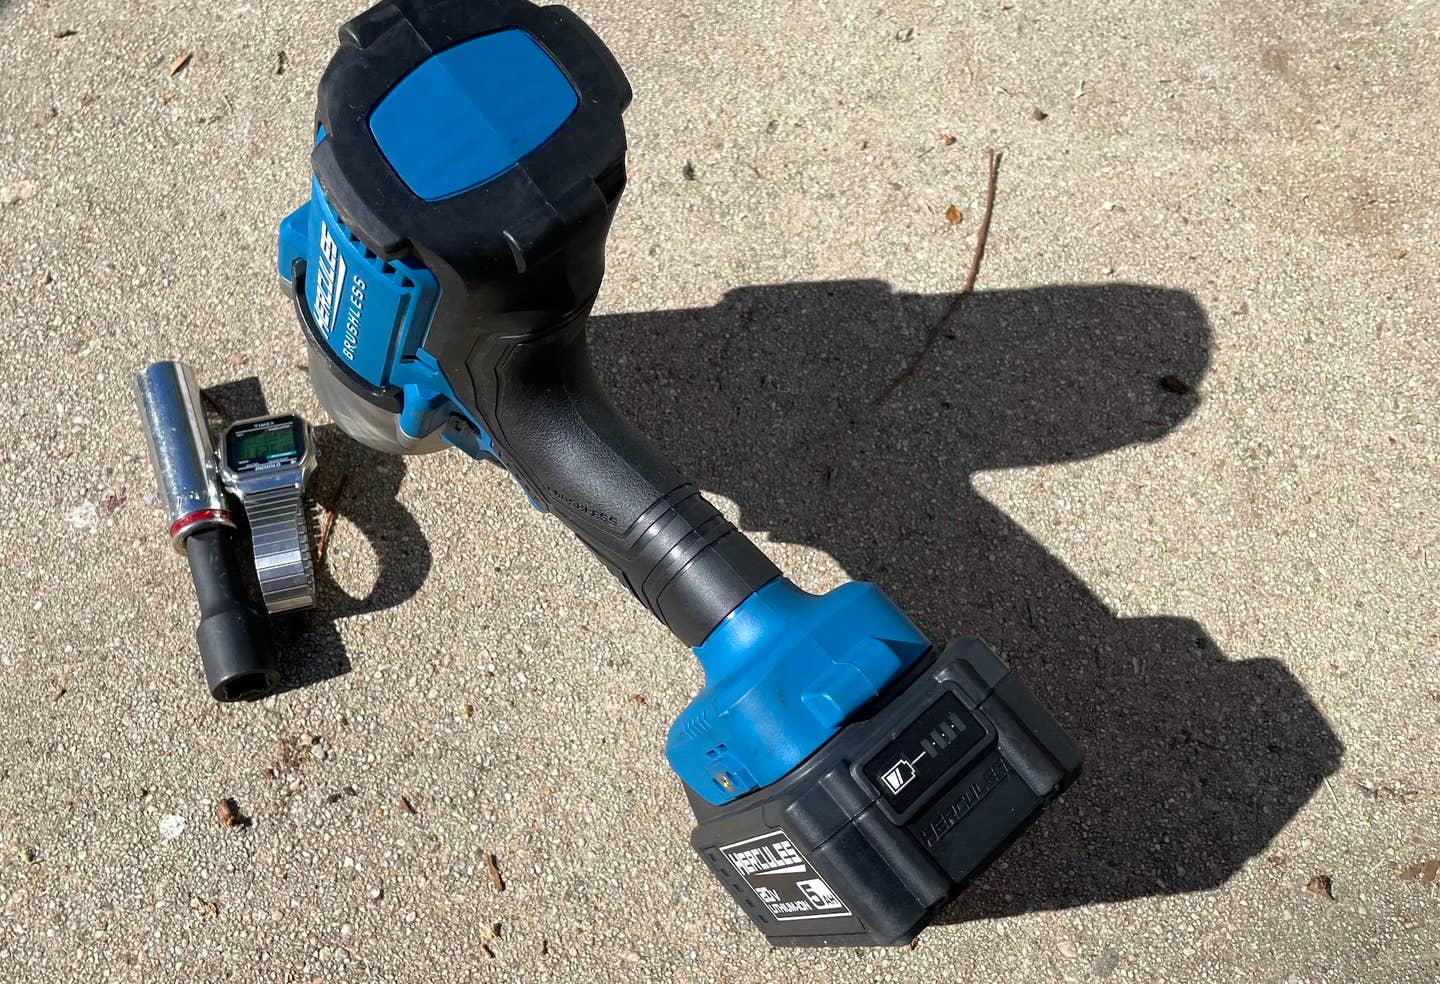 Harbor Freight's High Torque Half-Inch impact wrench